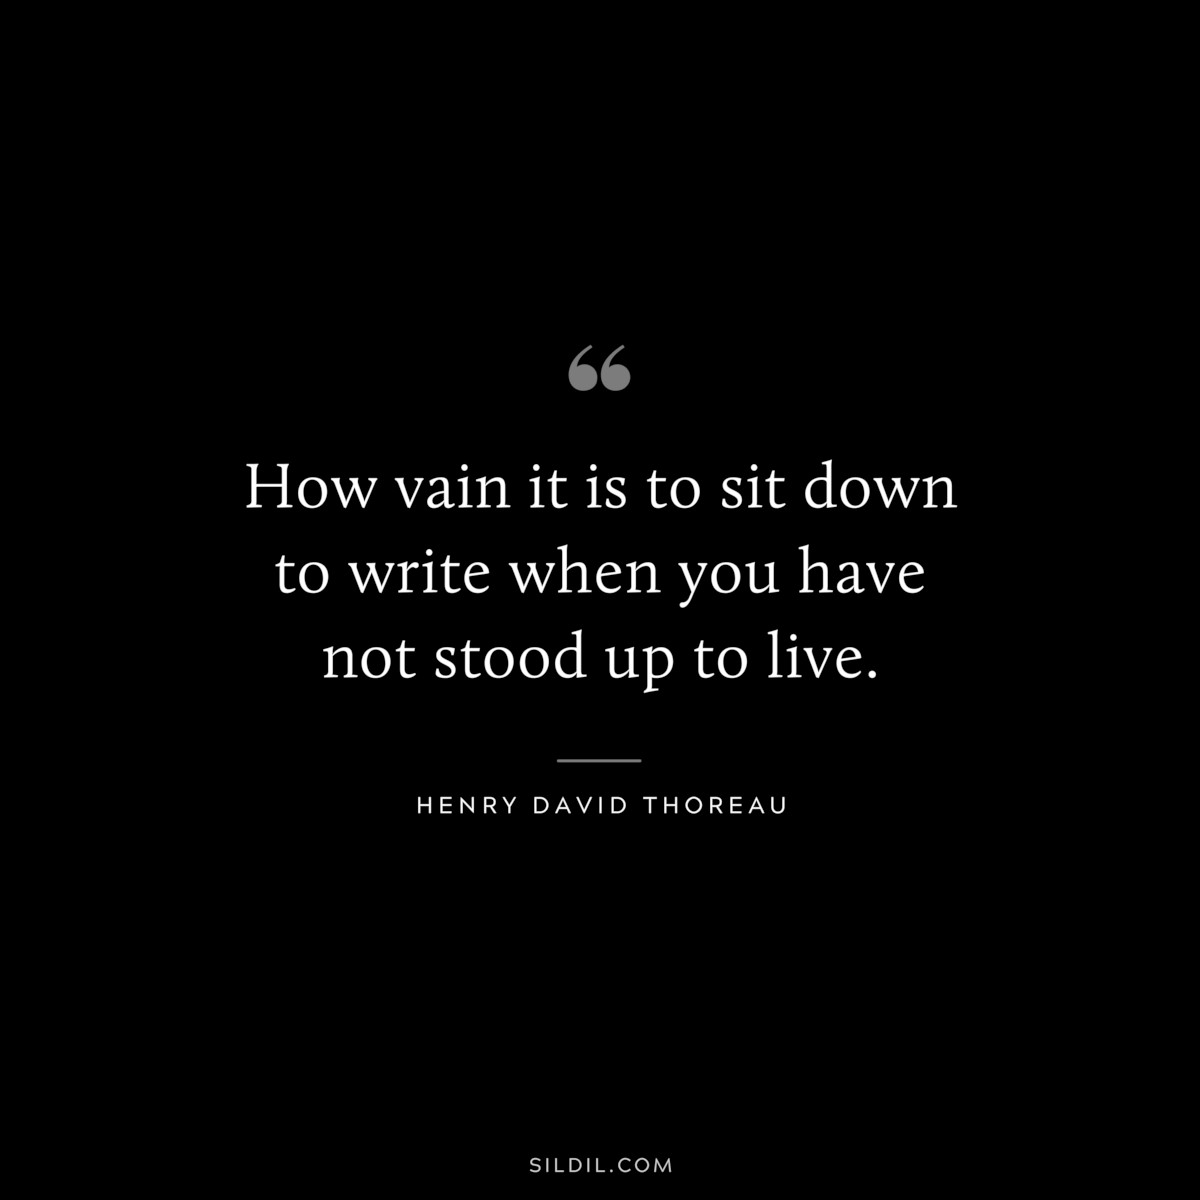 How vain it is to sit down to write when you have not stood up to live. — Henry David Thoreau